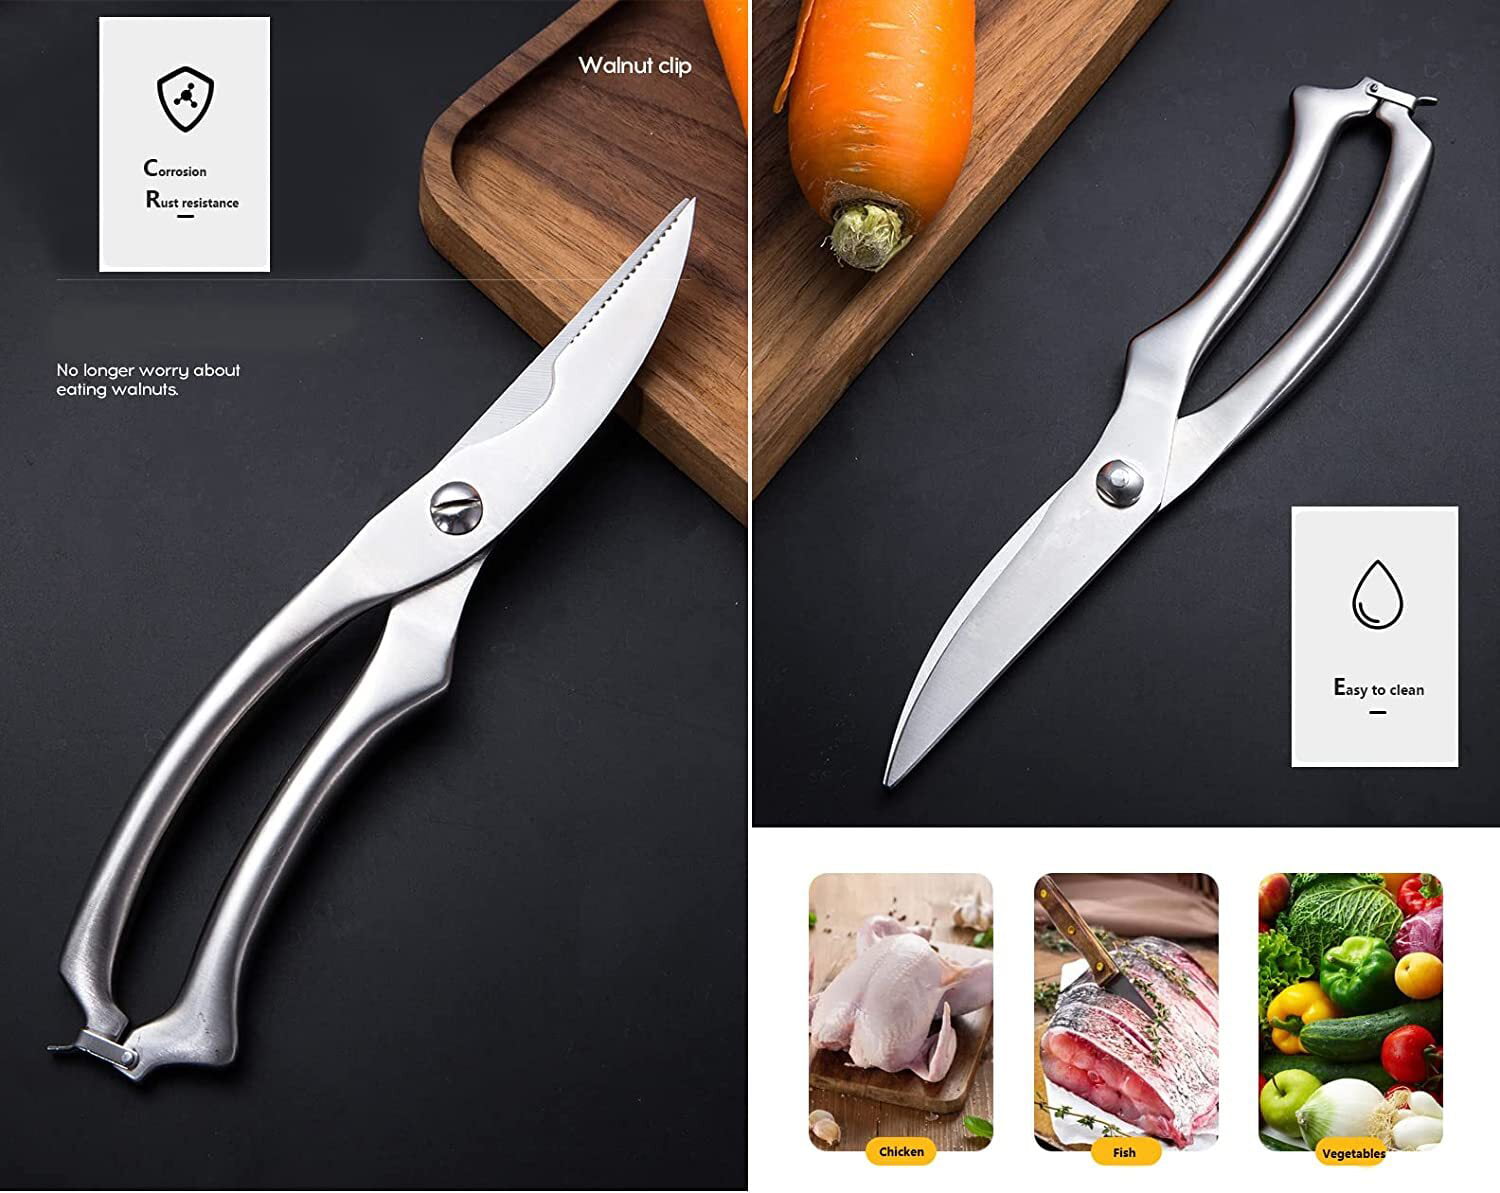 LavaLock® BBQ Kitchen Poultry Shears - Heavy Duty Spring Loaded Kitchen  Scissors- High Quality Stainless Steel